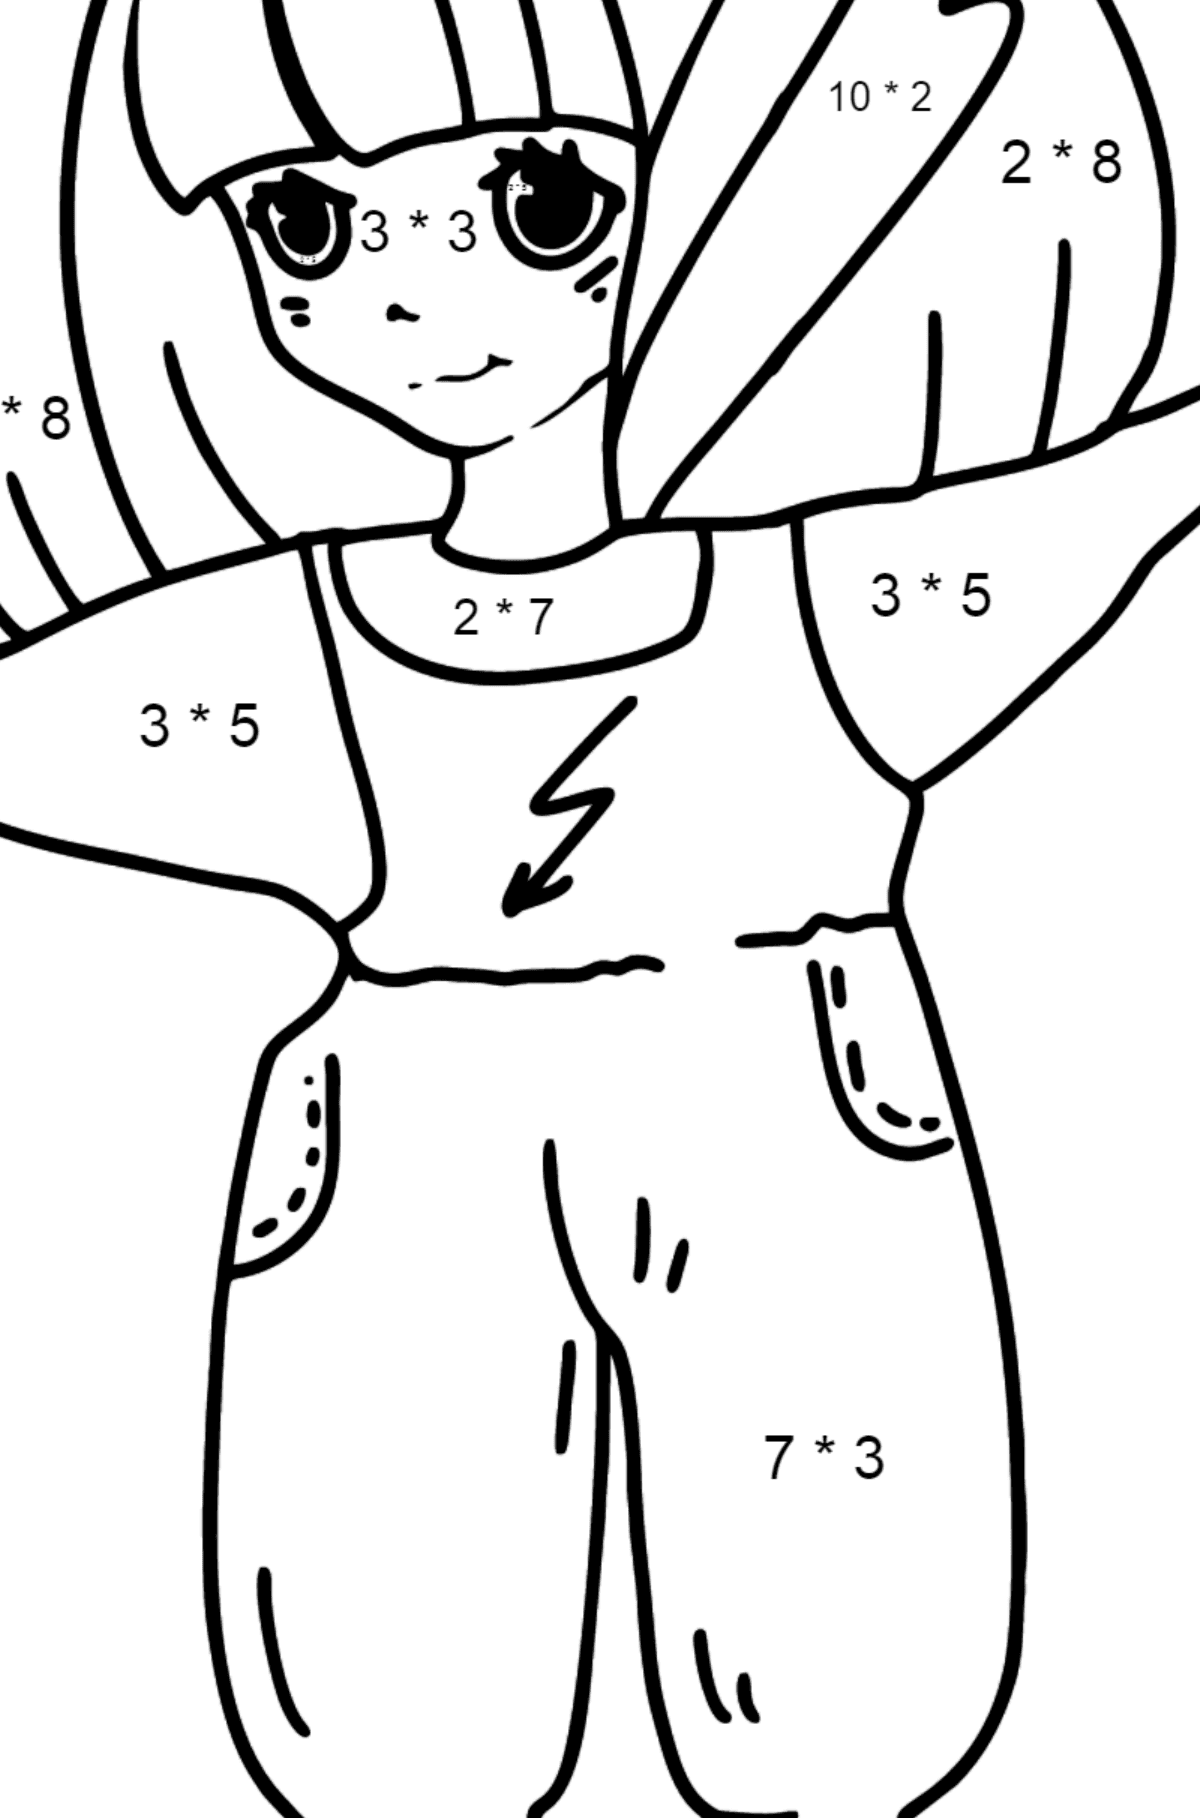 Thunder Anime Girl Coloring Pages - Math Coloring - Multiplication for Kids